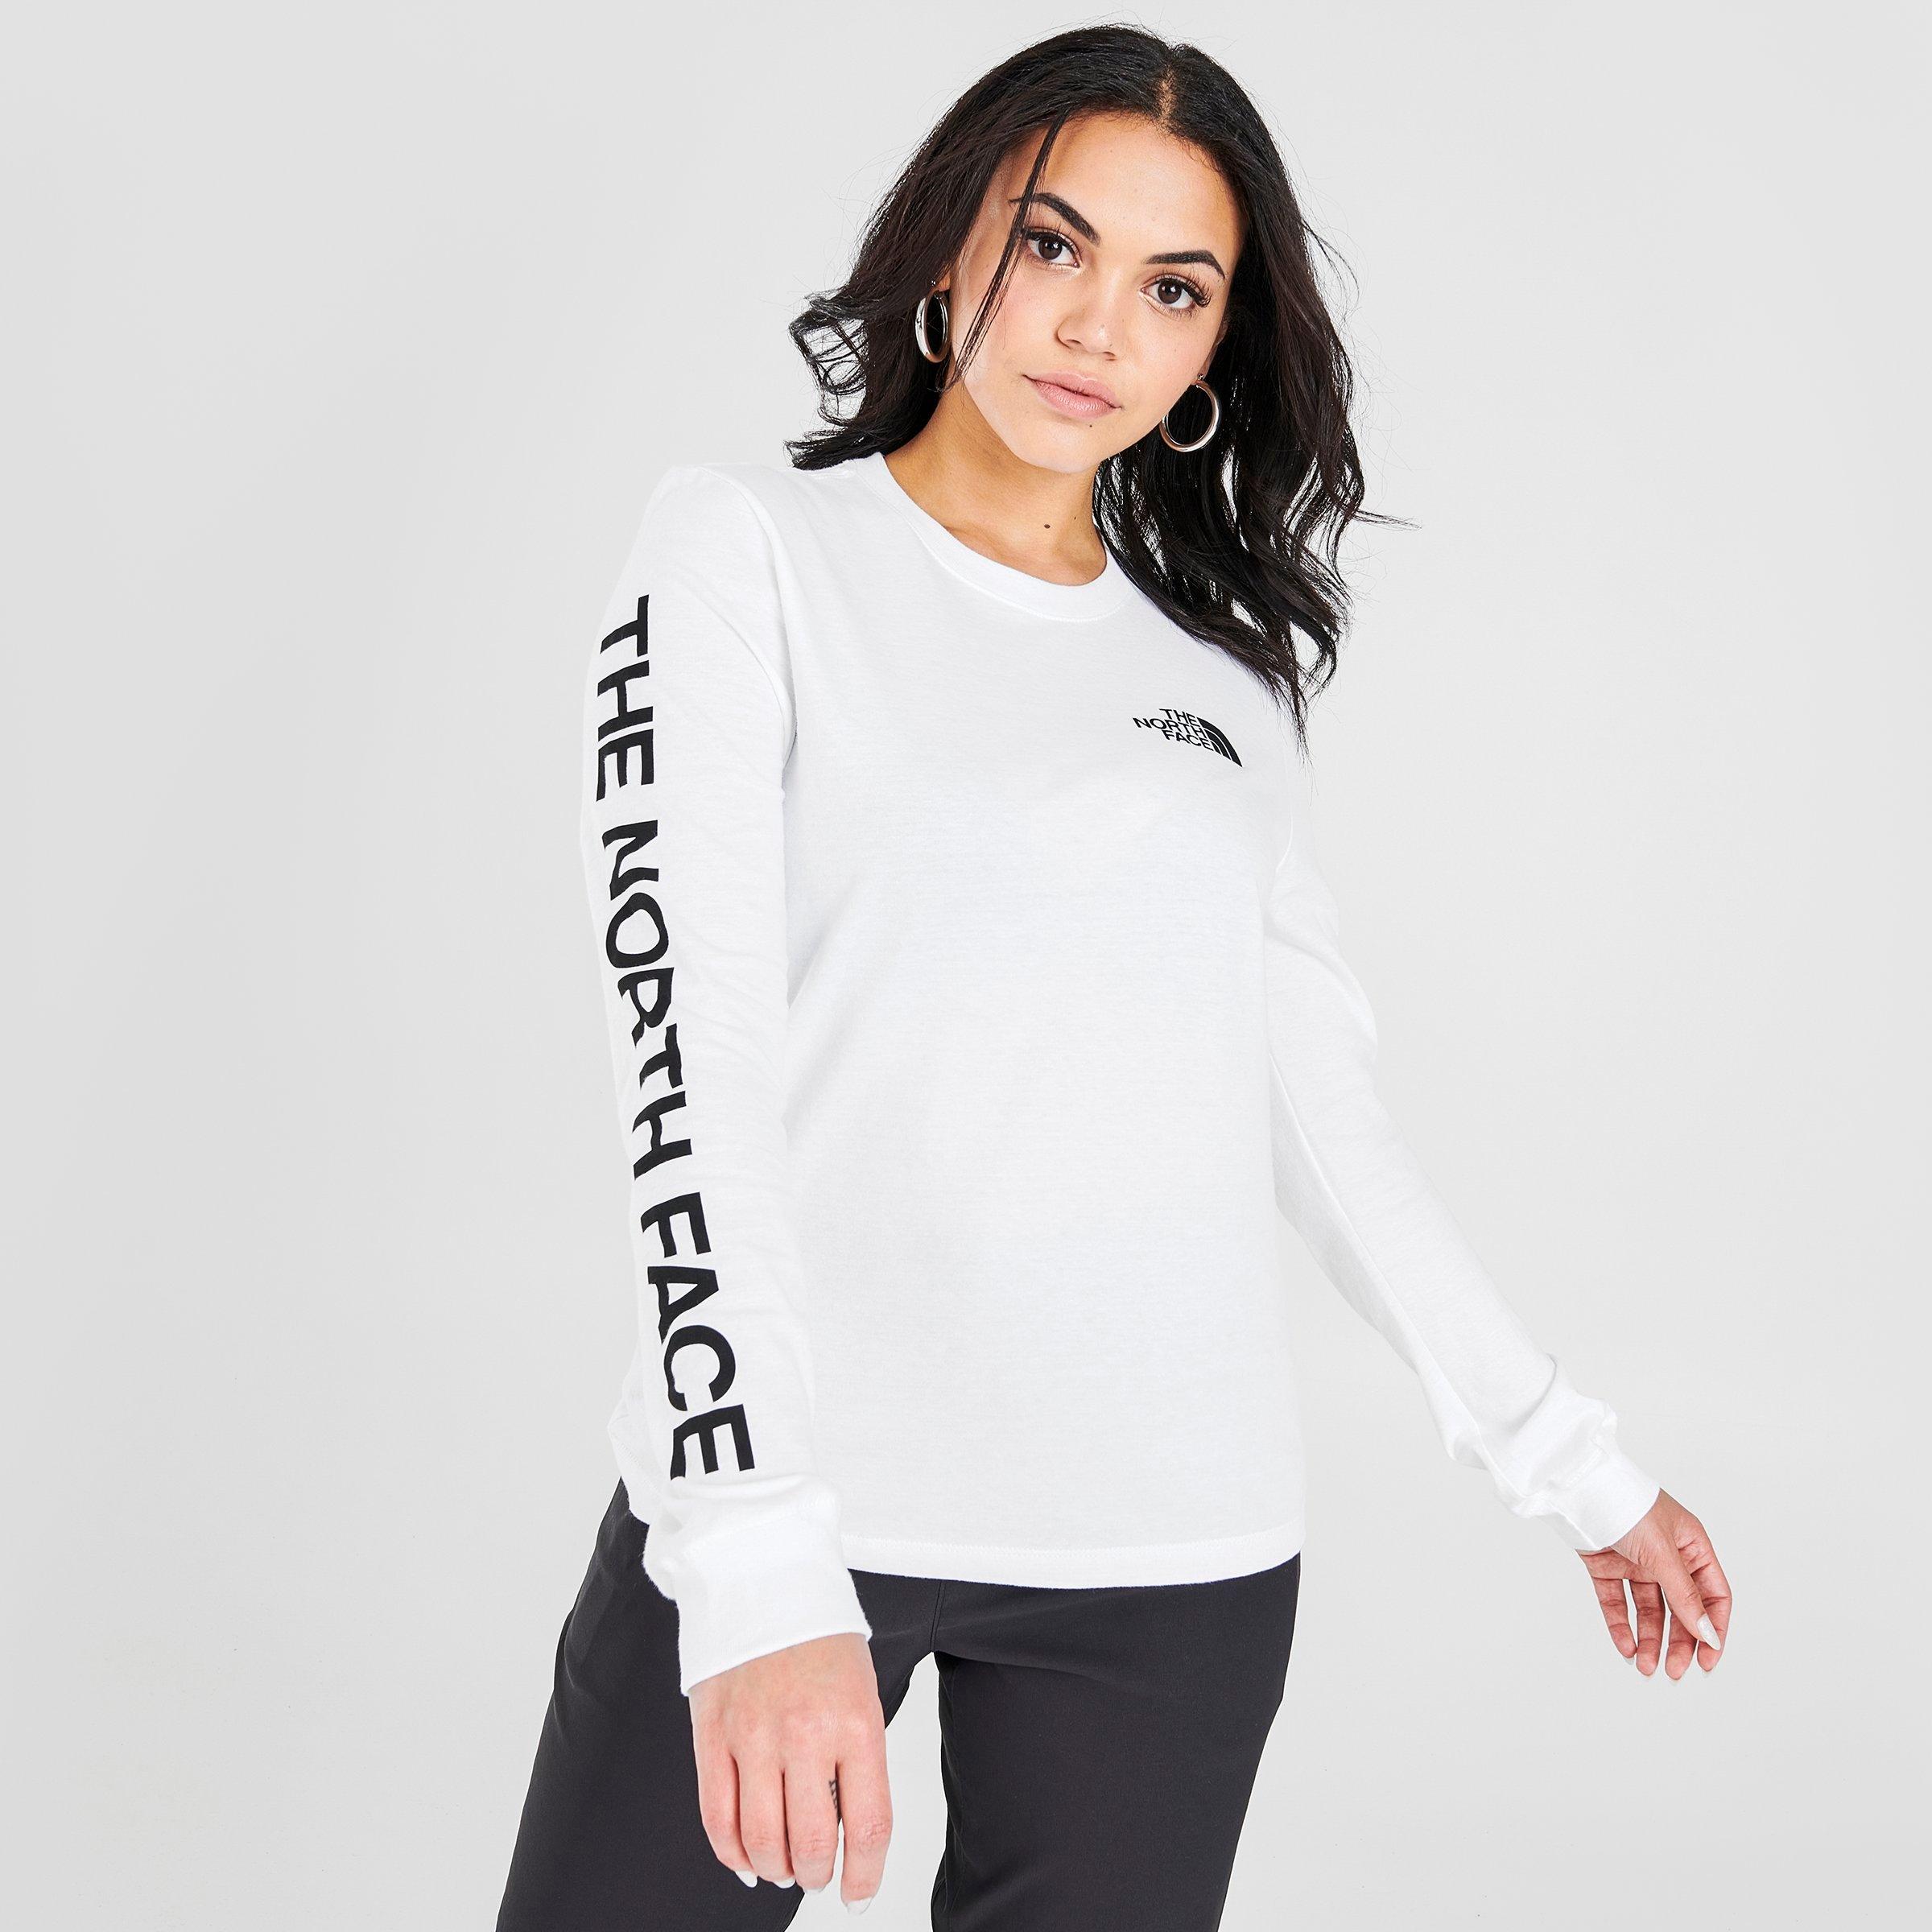 north face long sleeve top womens